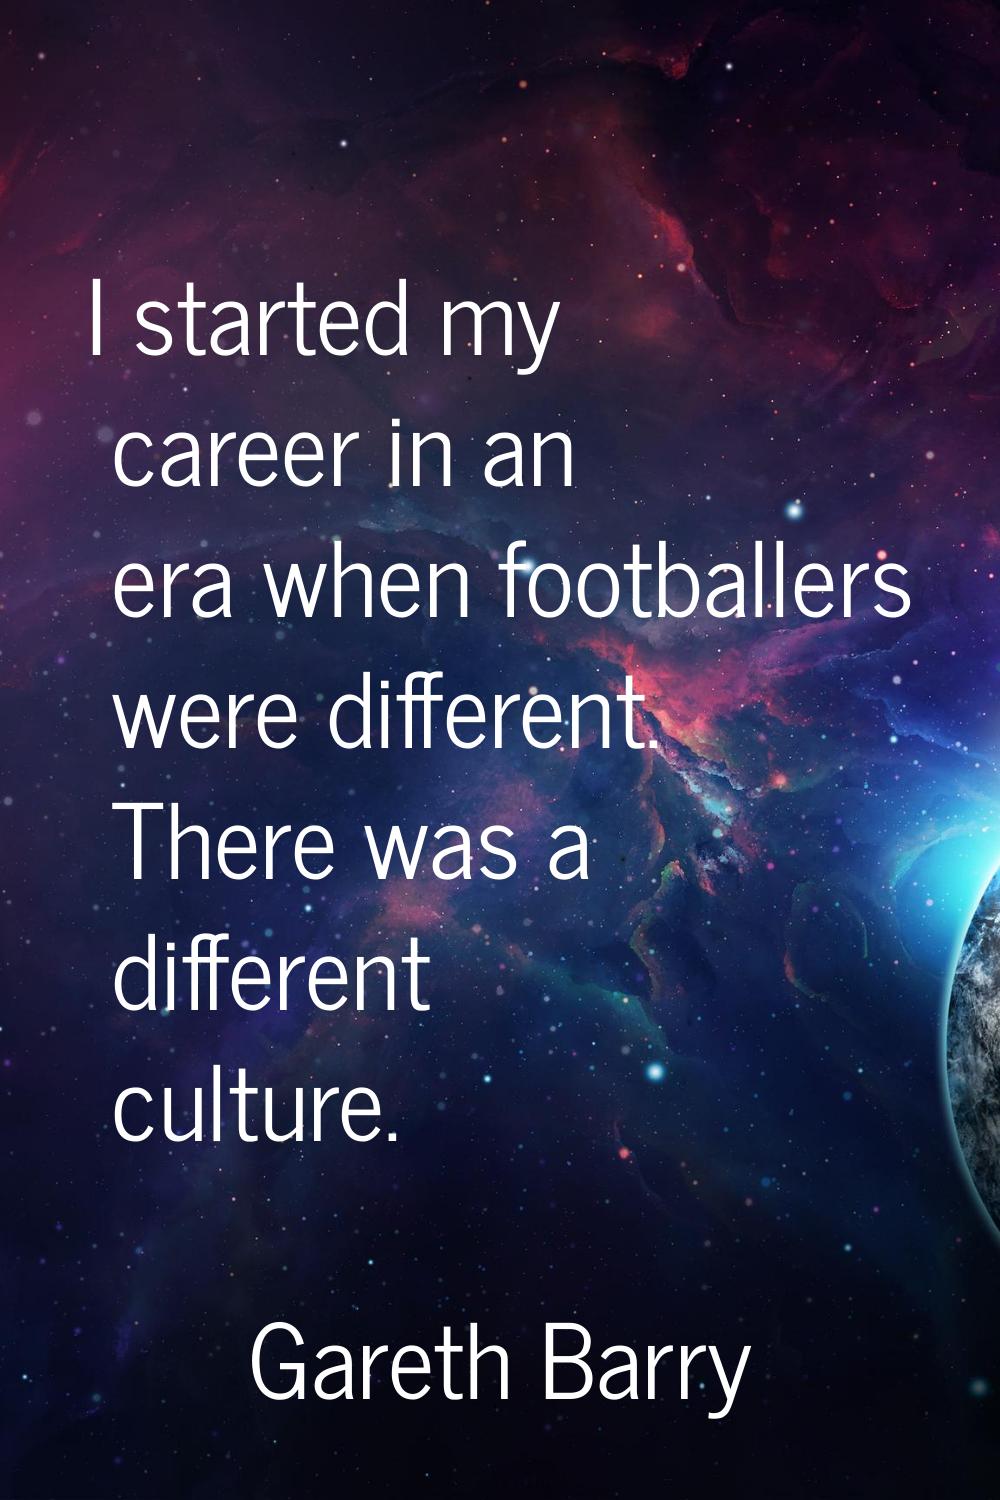 I started my career in an era when footballers were different. There was a different culture.